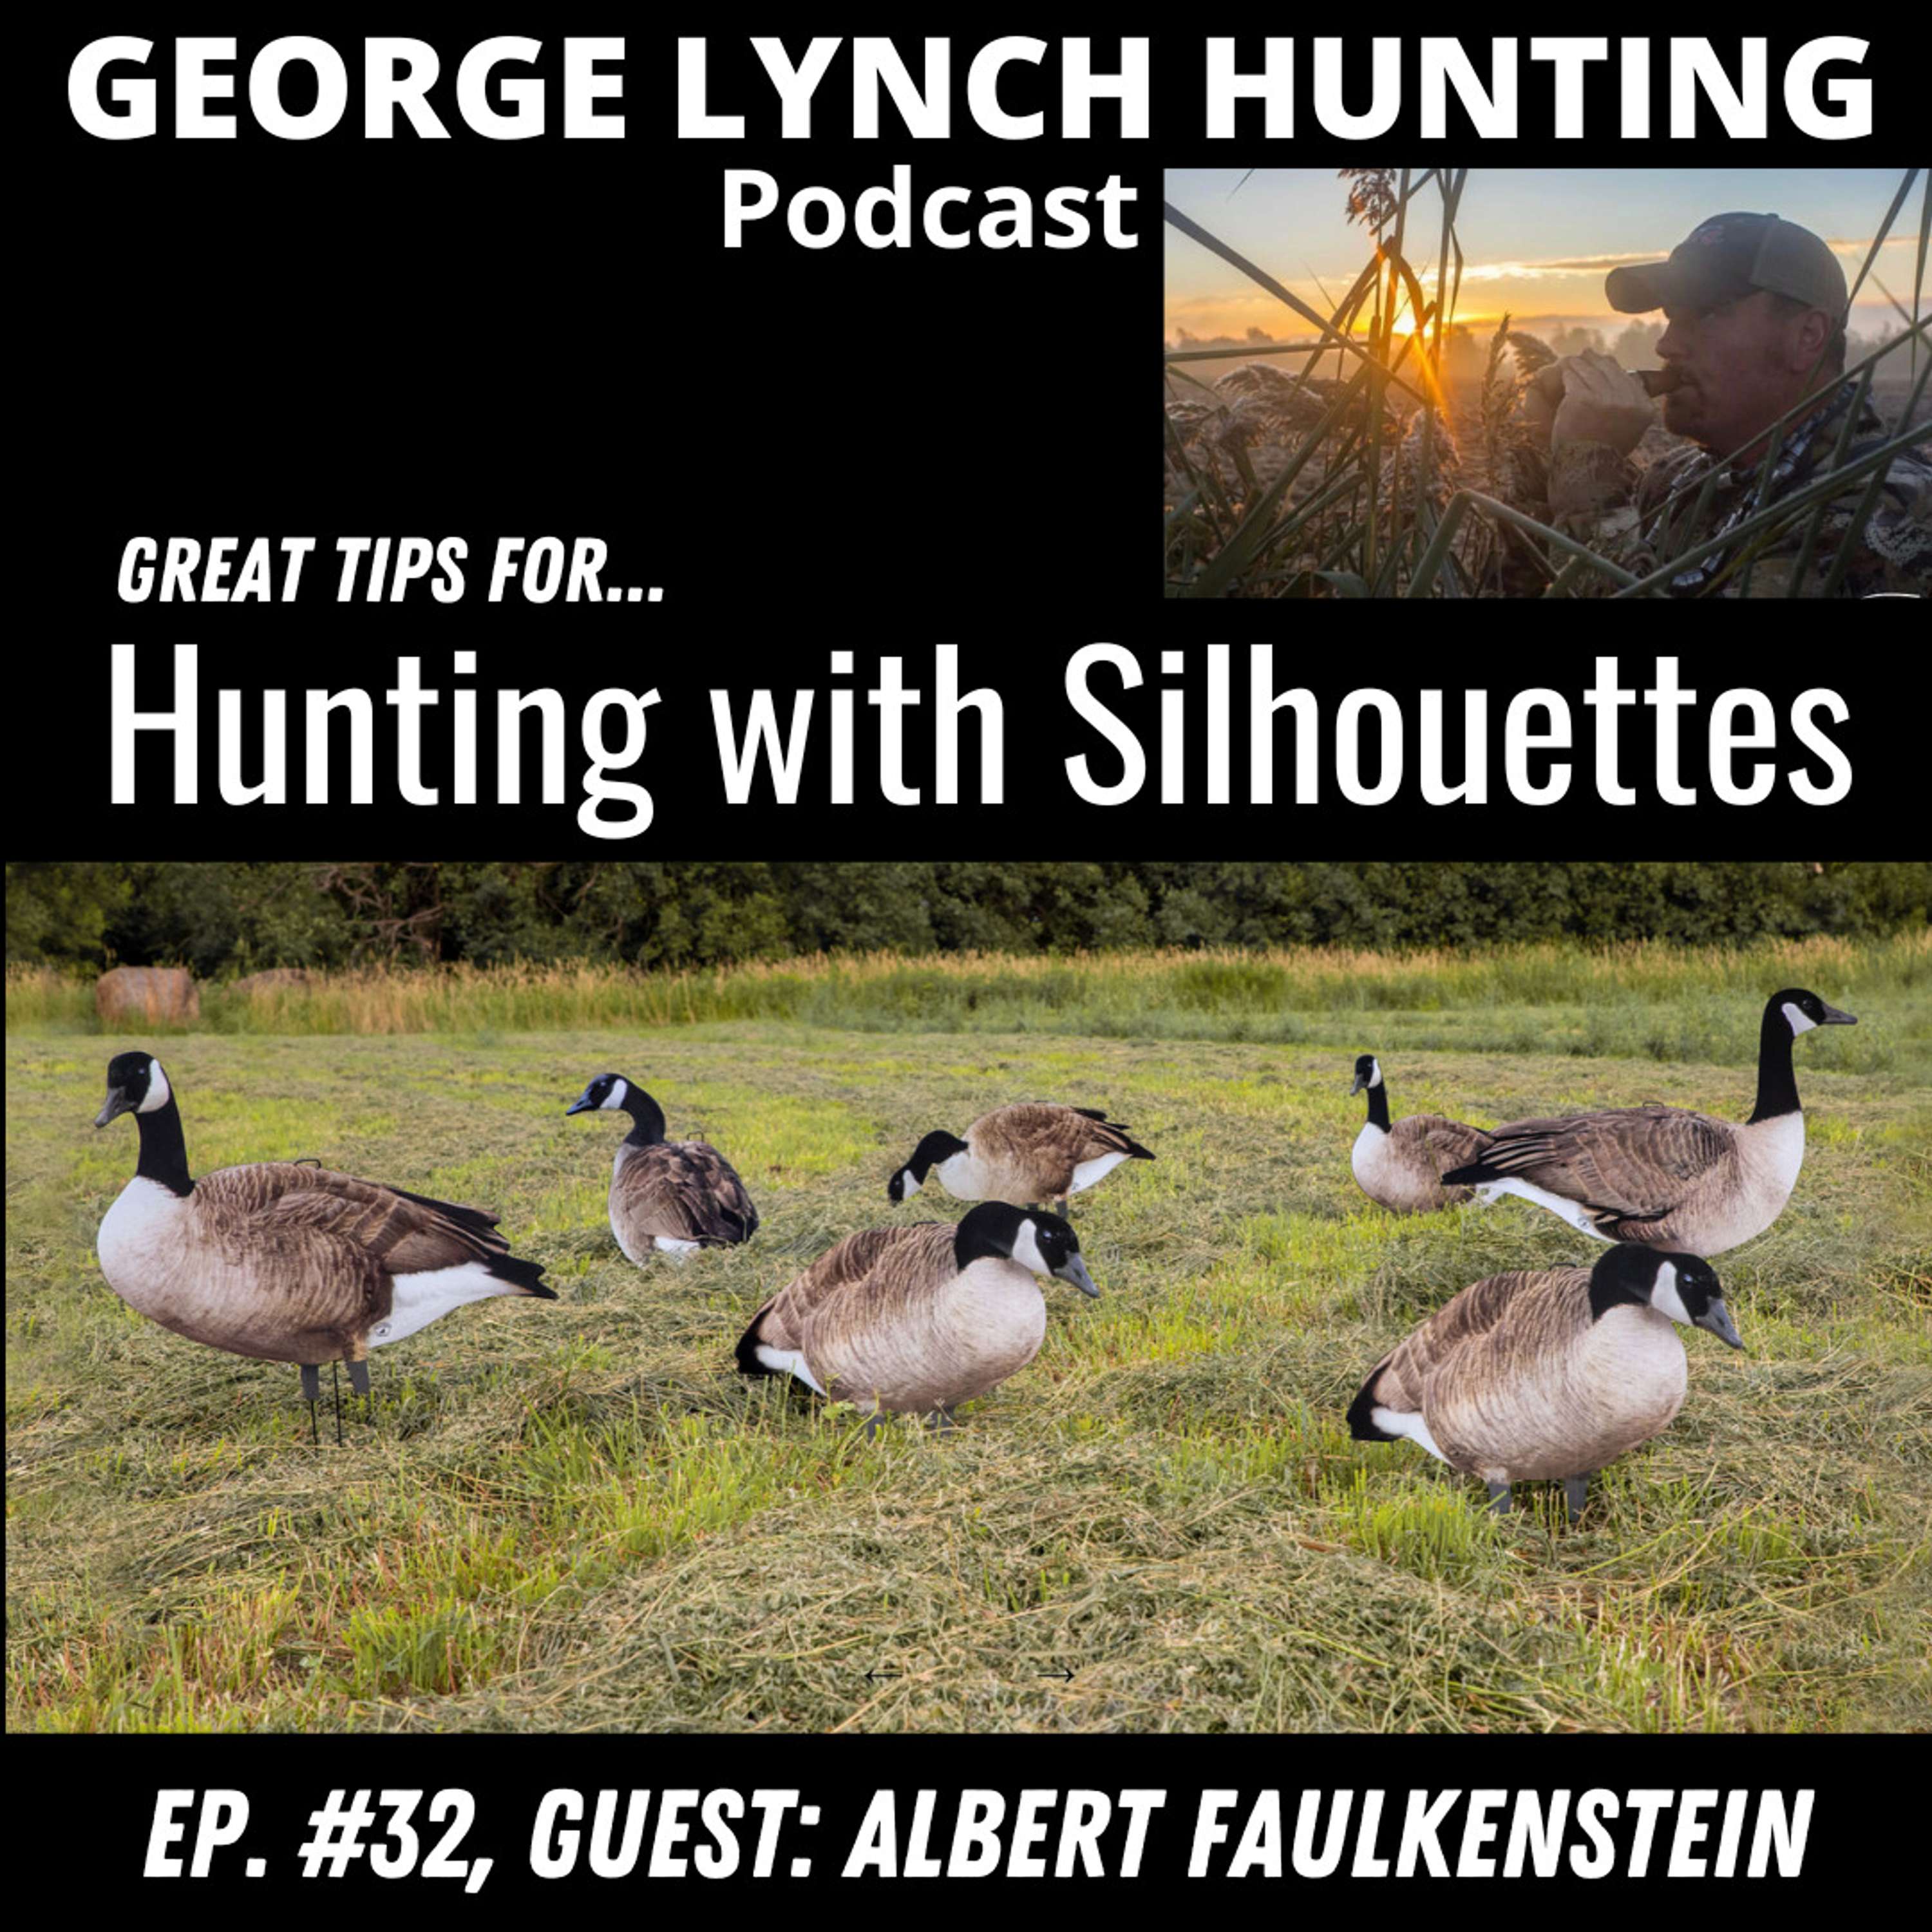 GREAT TIPS for HUNTING with SILOUETTES with Albert Faulkenstein